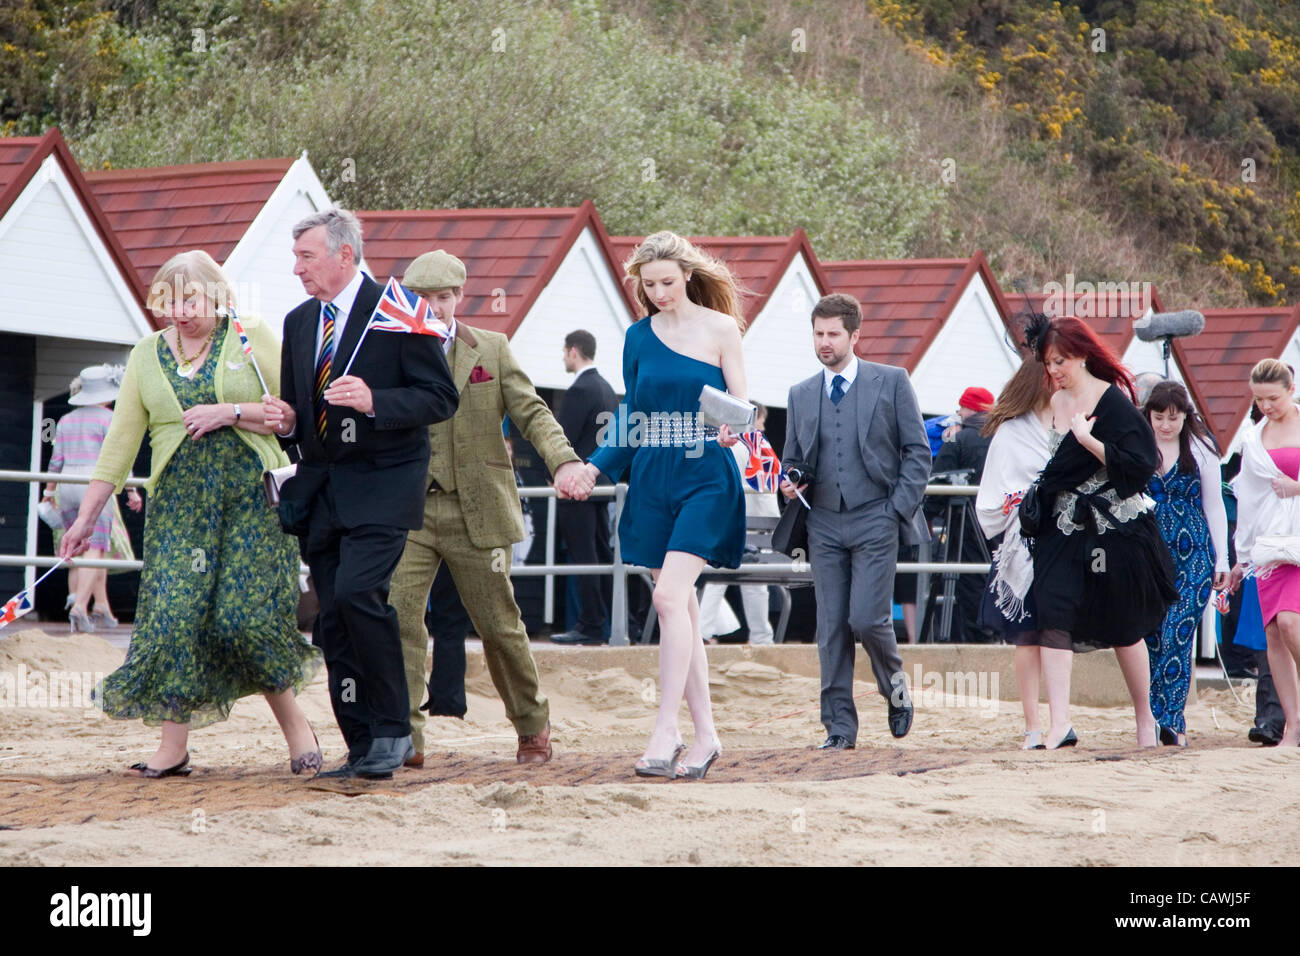 Bournemouth, UK. 27 April, 2012. England and Wales' first beach wedding on Bournemouth beach. Kate Smith & Frazer Seed won the package in ITV Daybreak's competition which included bridal gown, bouquet, cake, wedding breakfast, champagne, marquee, overnight accommodation for bride, groom & guests Stock Photo